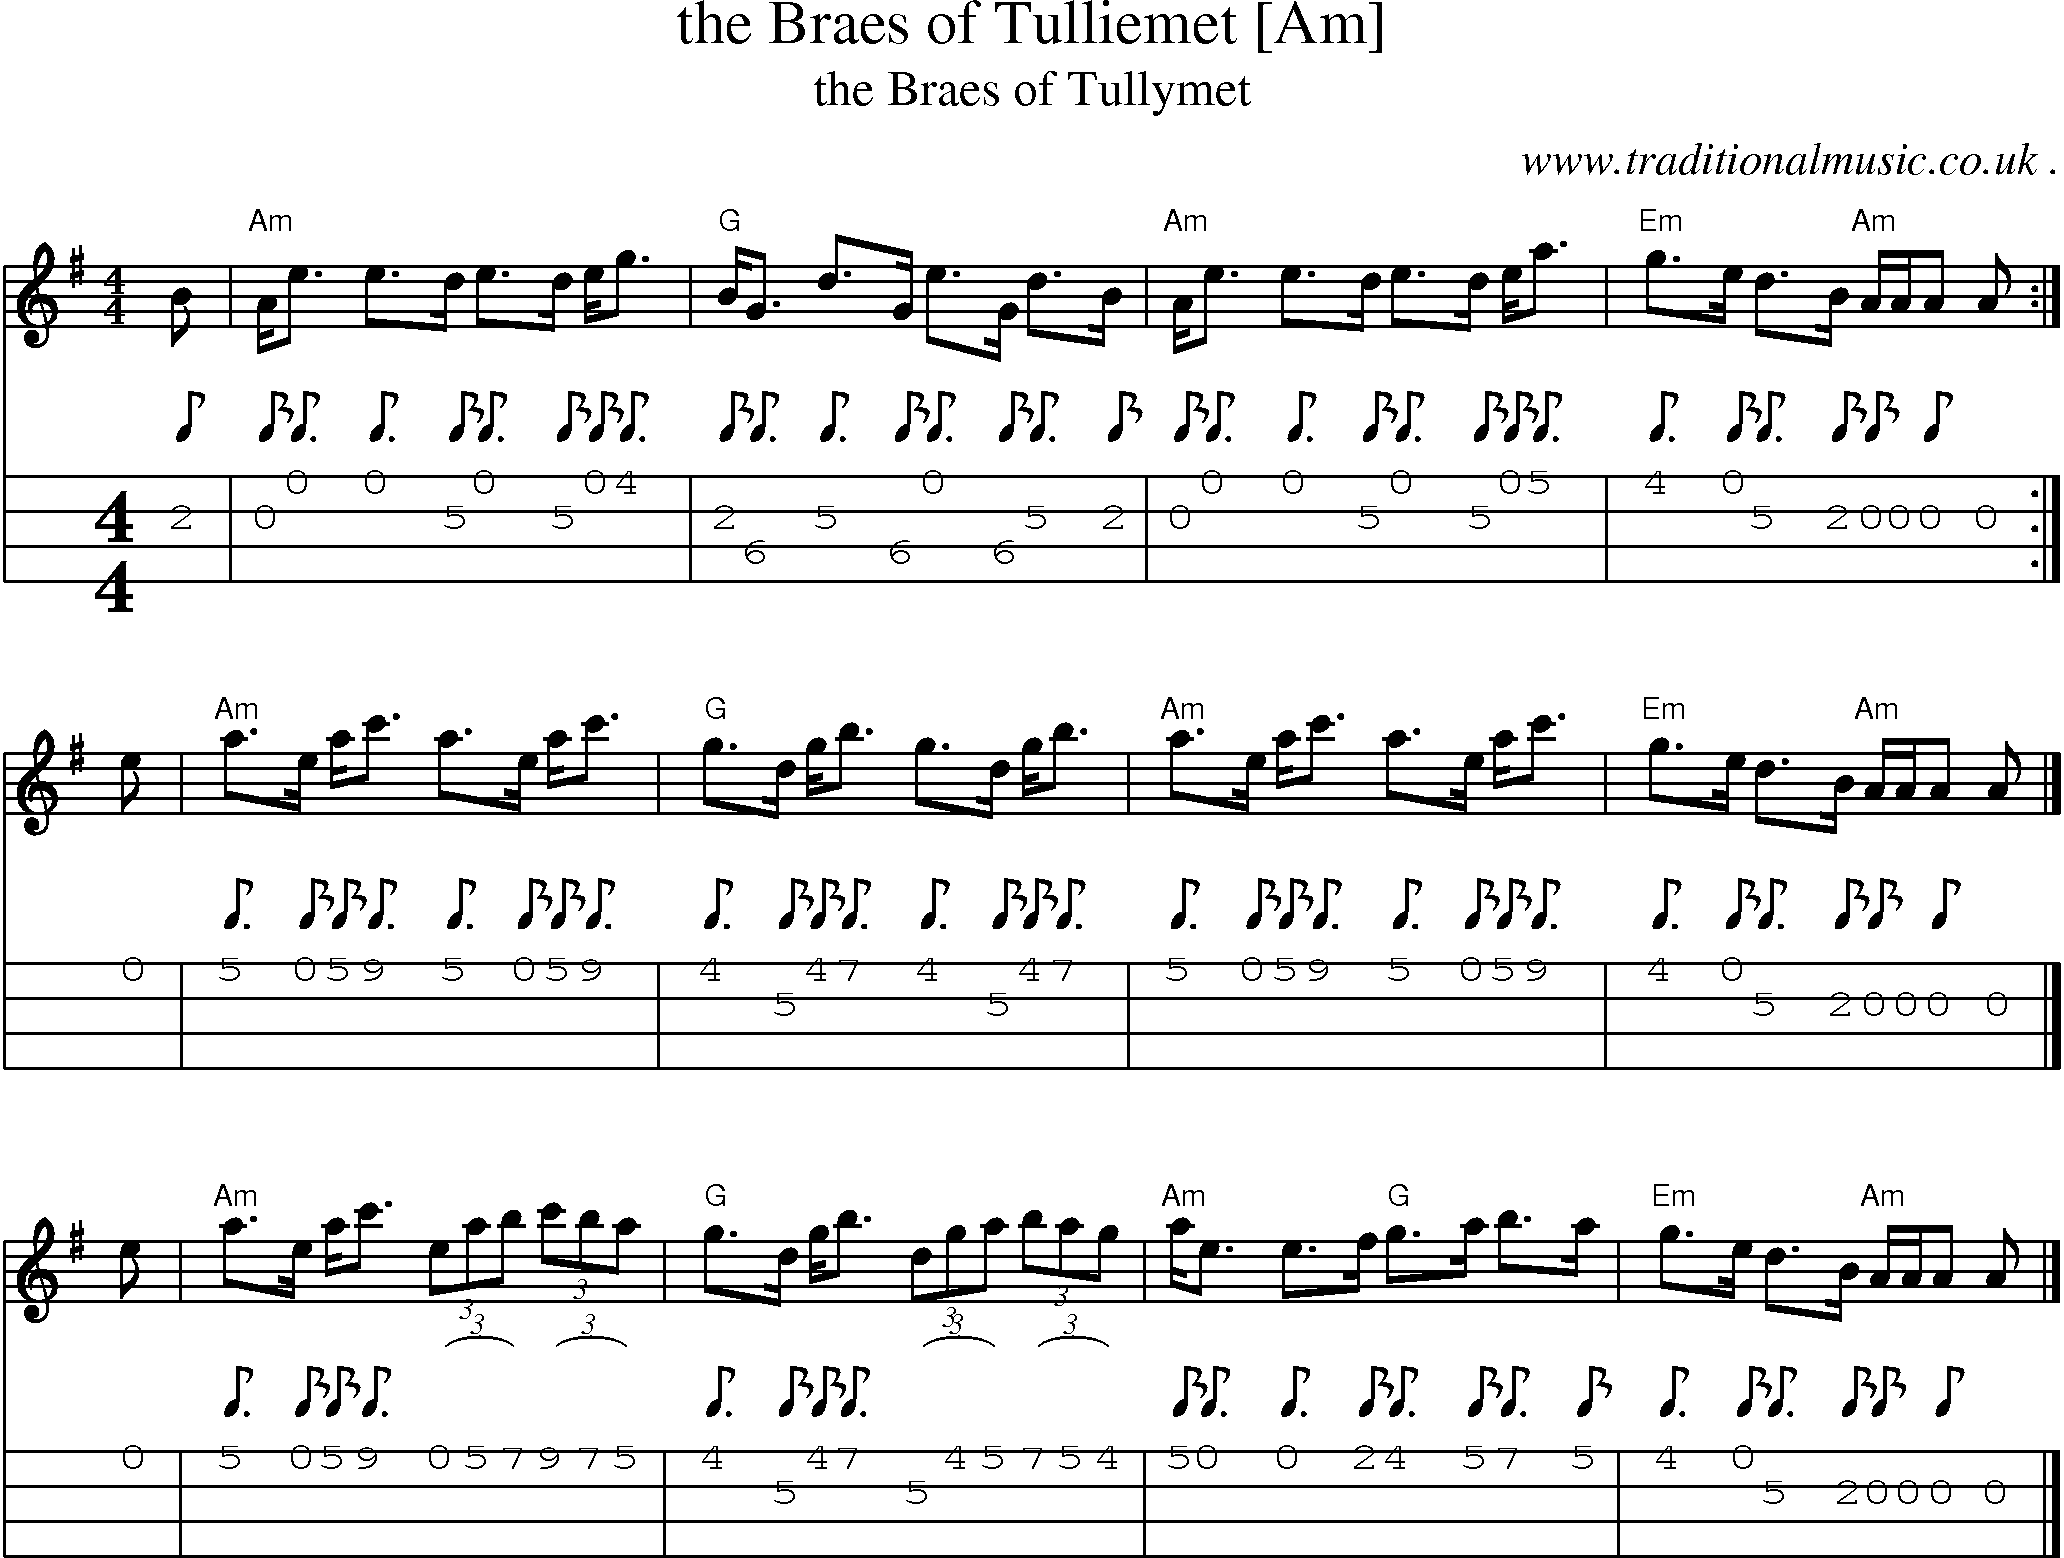 Sheet-music  score, Chords and Mandolin Tabs for The Braes Of Tulliemet [am]